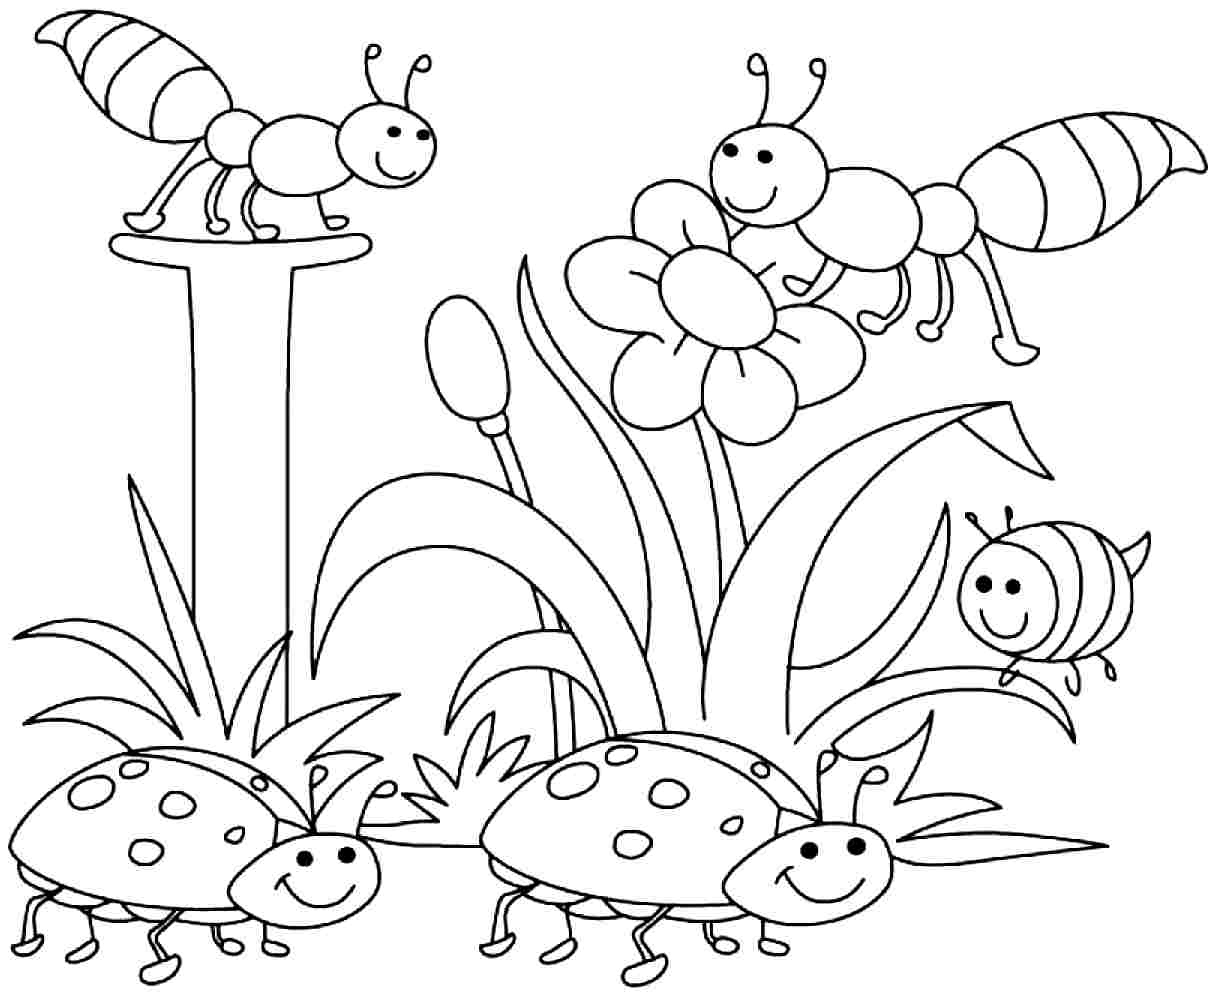 Springtime Pictures Coloring Pages For Adults To Print